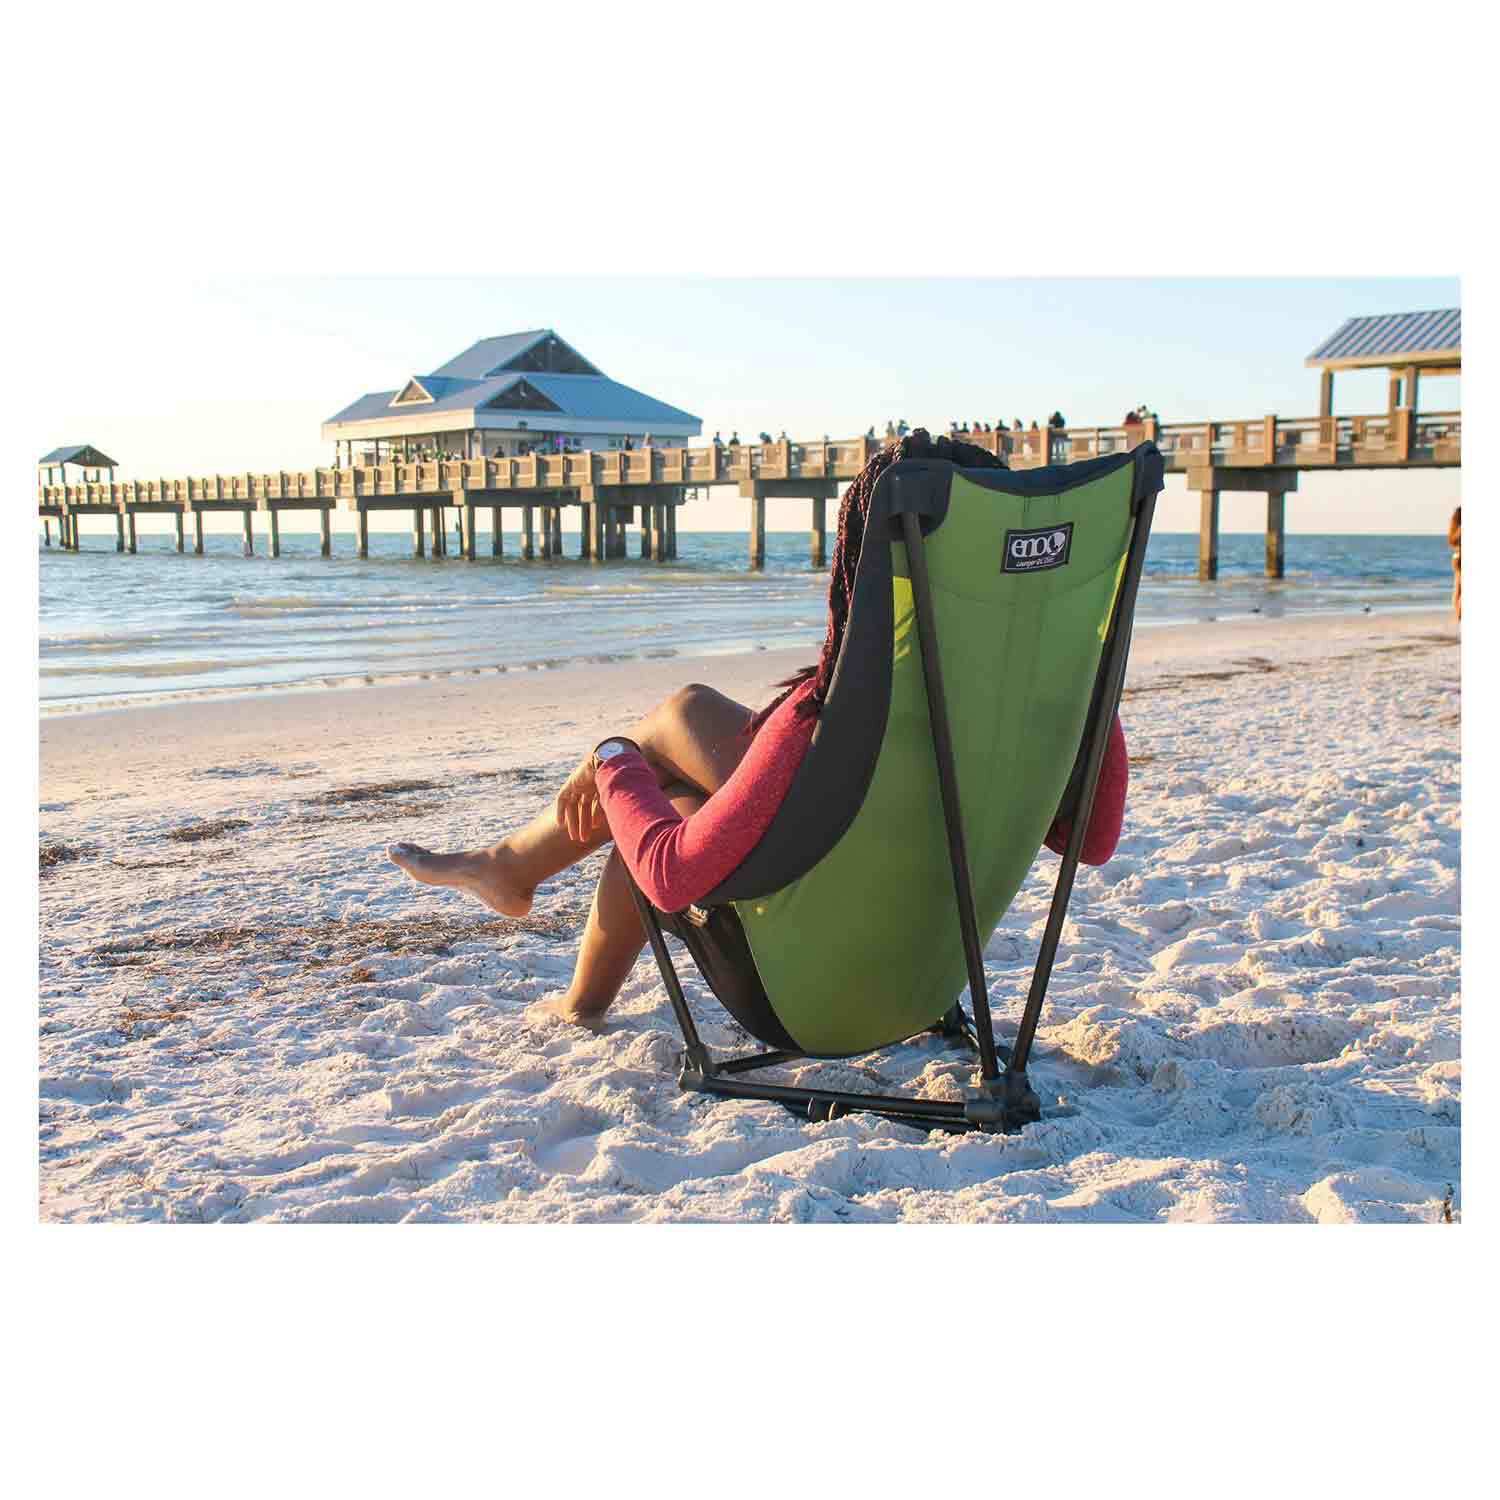 ENO Lounger™ DL Chair